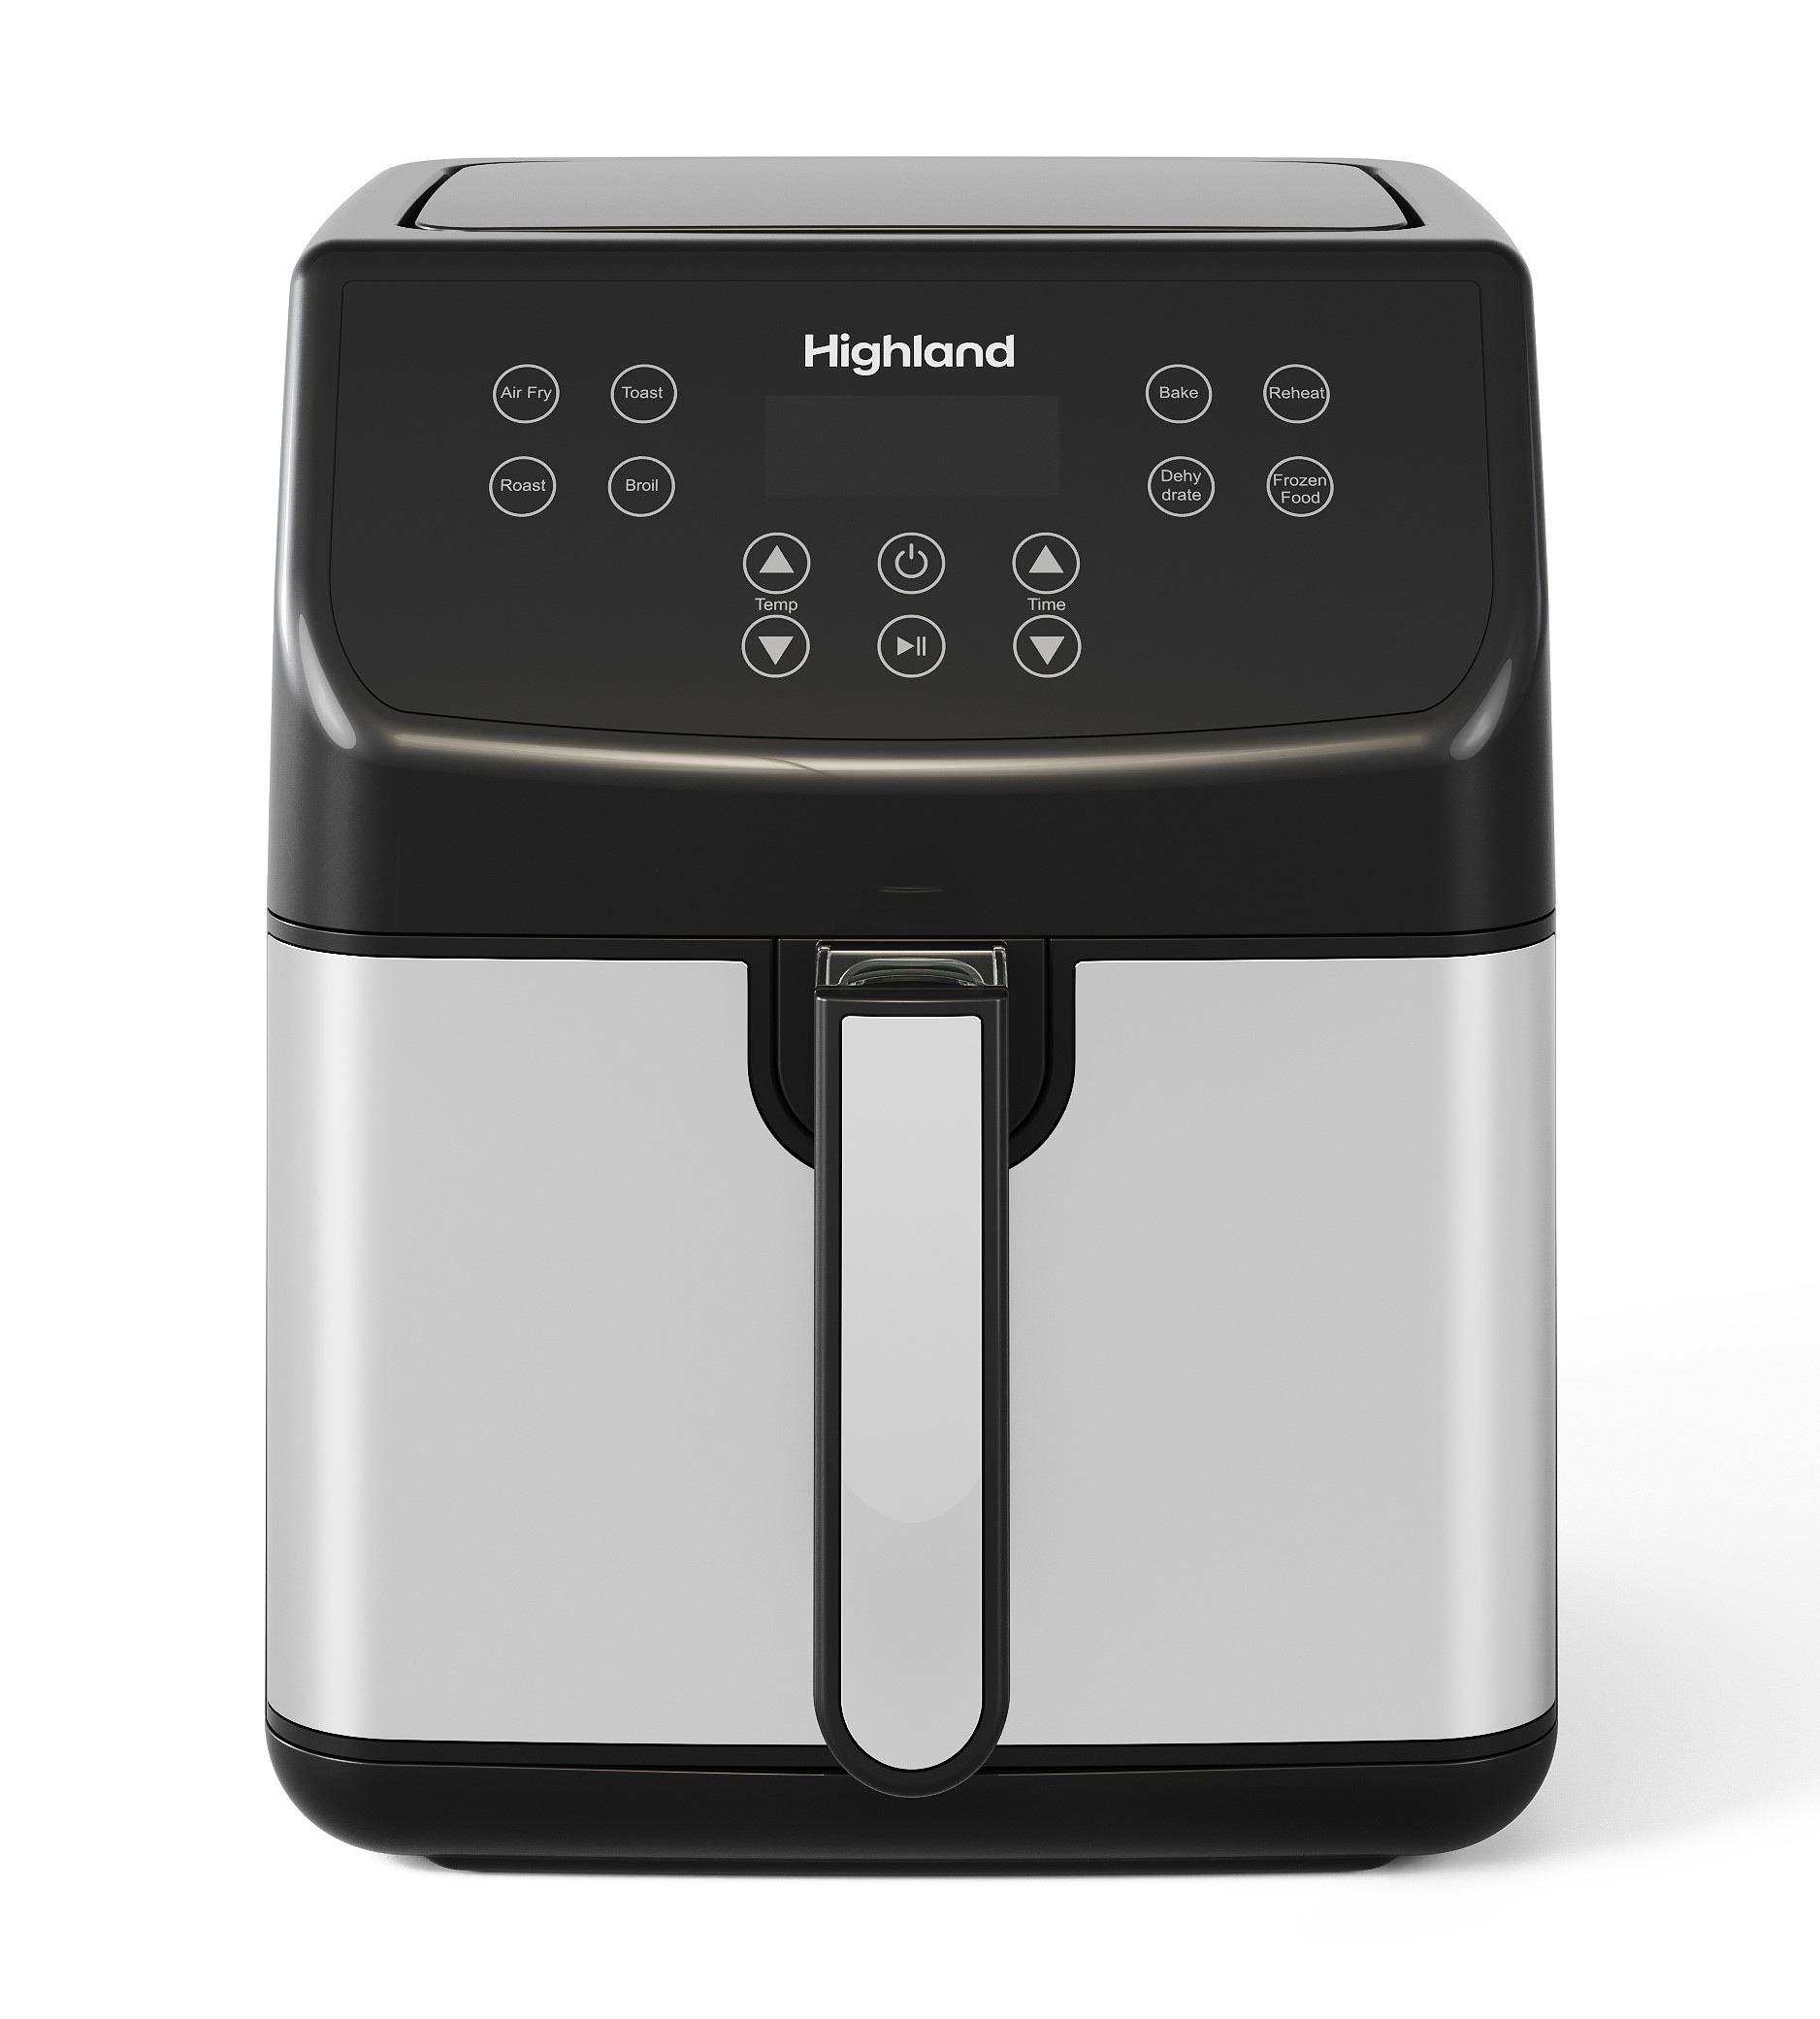 Nutricook Rapid Air Fryer with built in Preheat function Home purpose USA  Plug